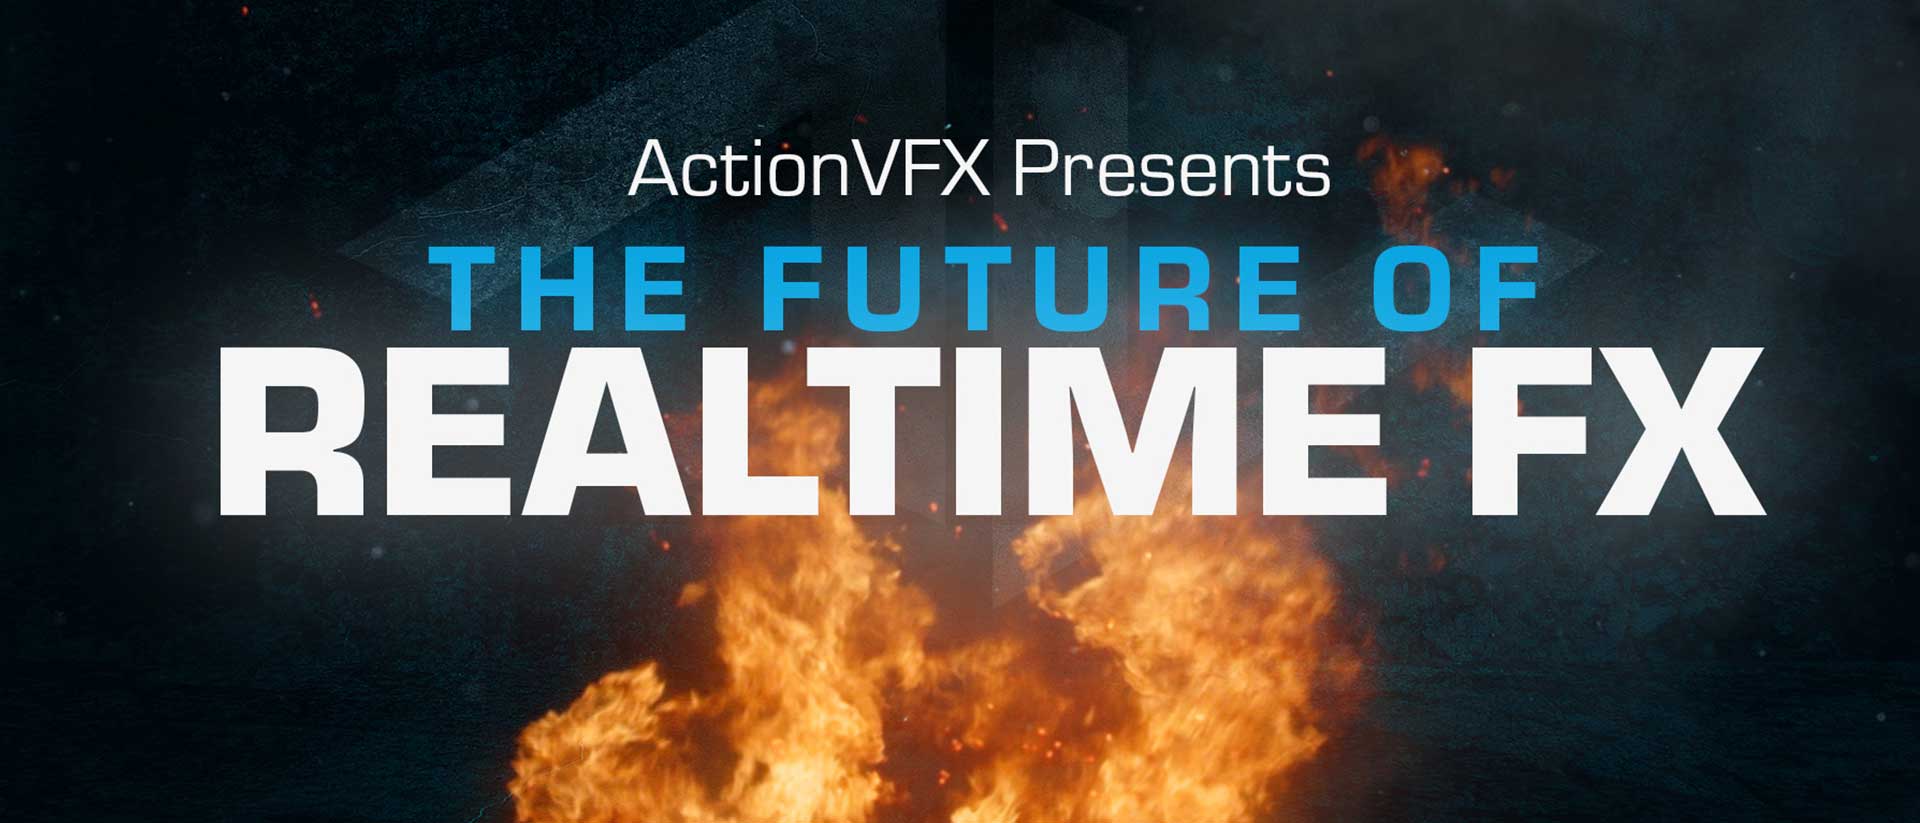 The Future of Realtime FX - Presented by ActionVFX